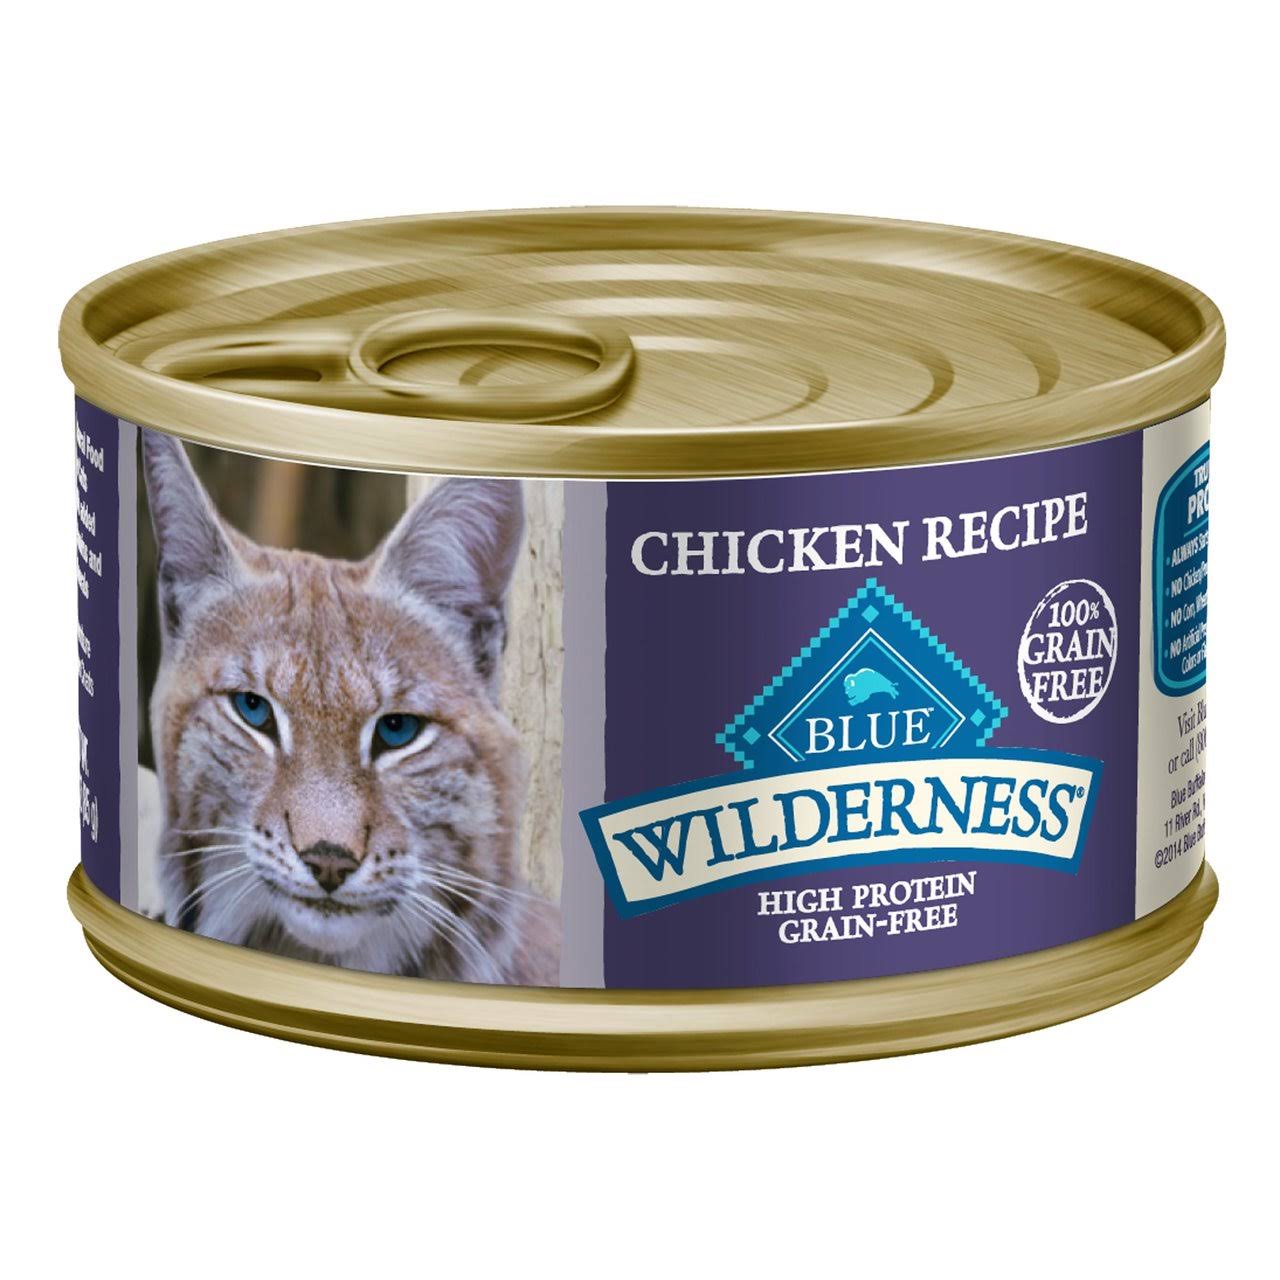 Blue Wilderness Food for Cats - Chicken